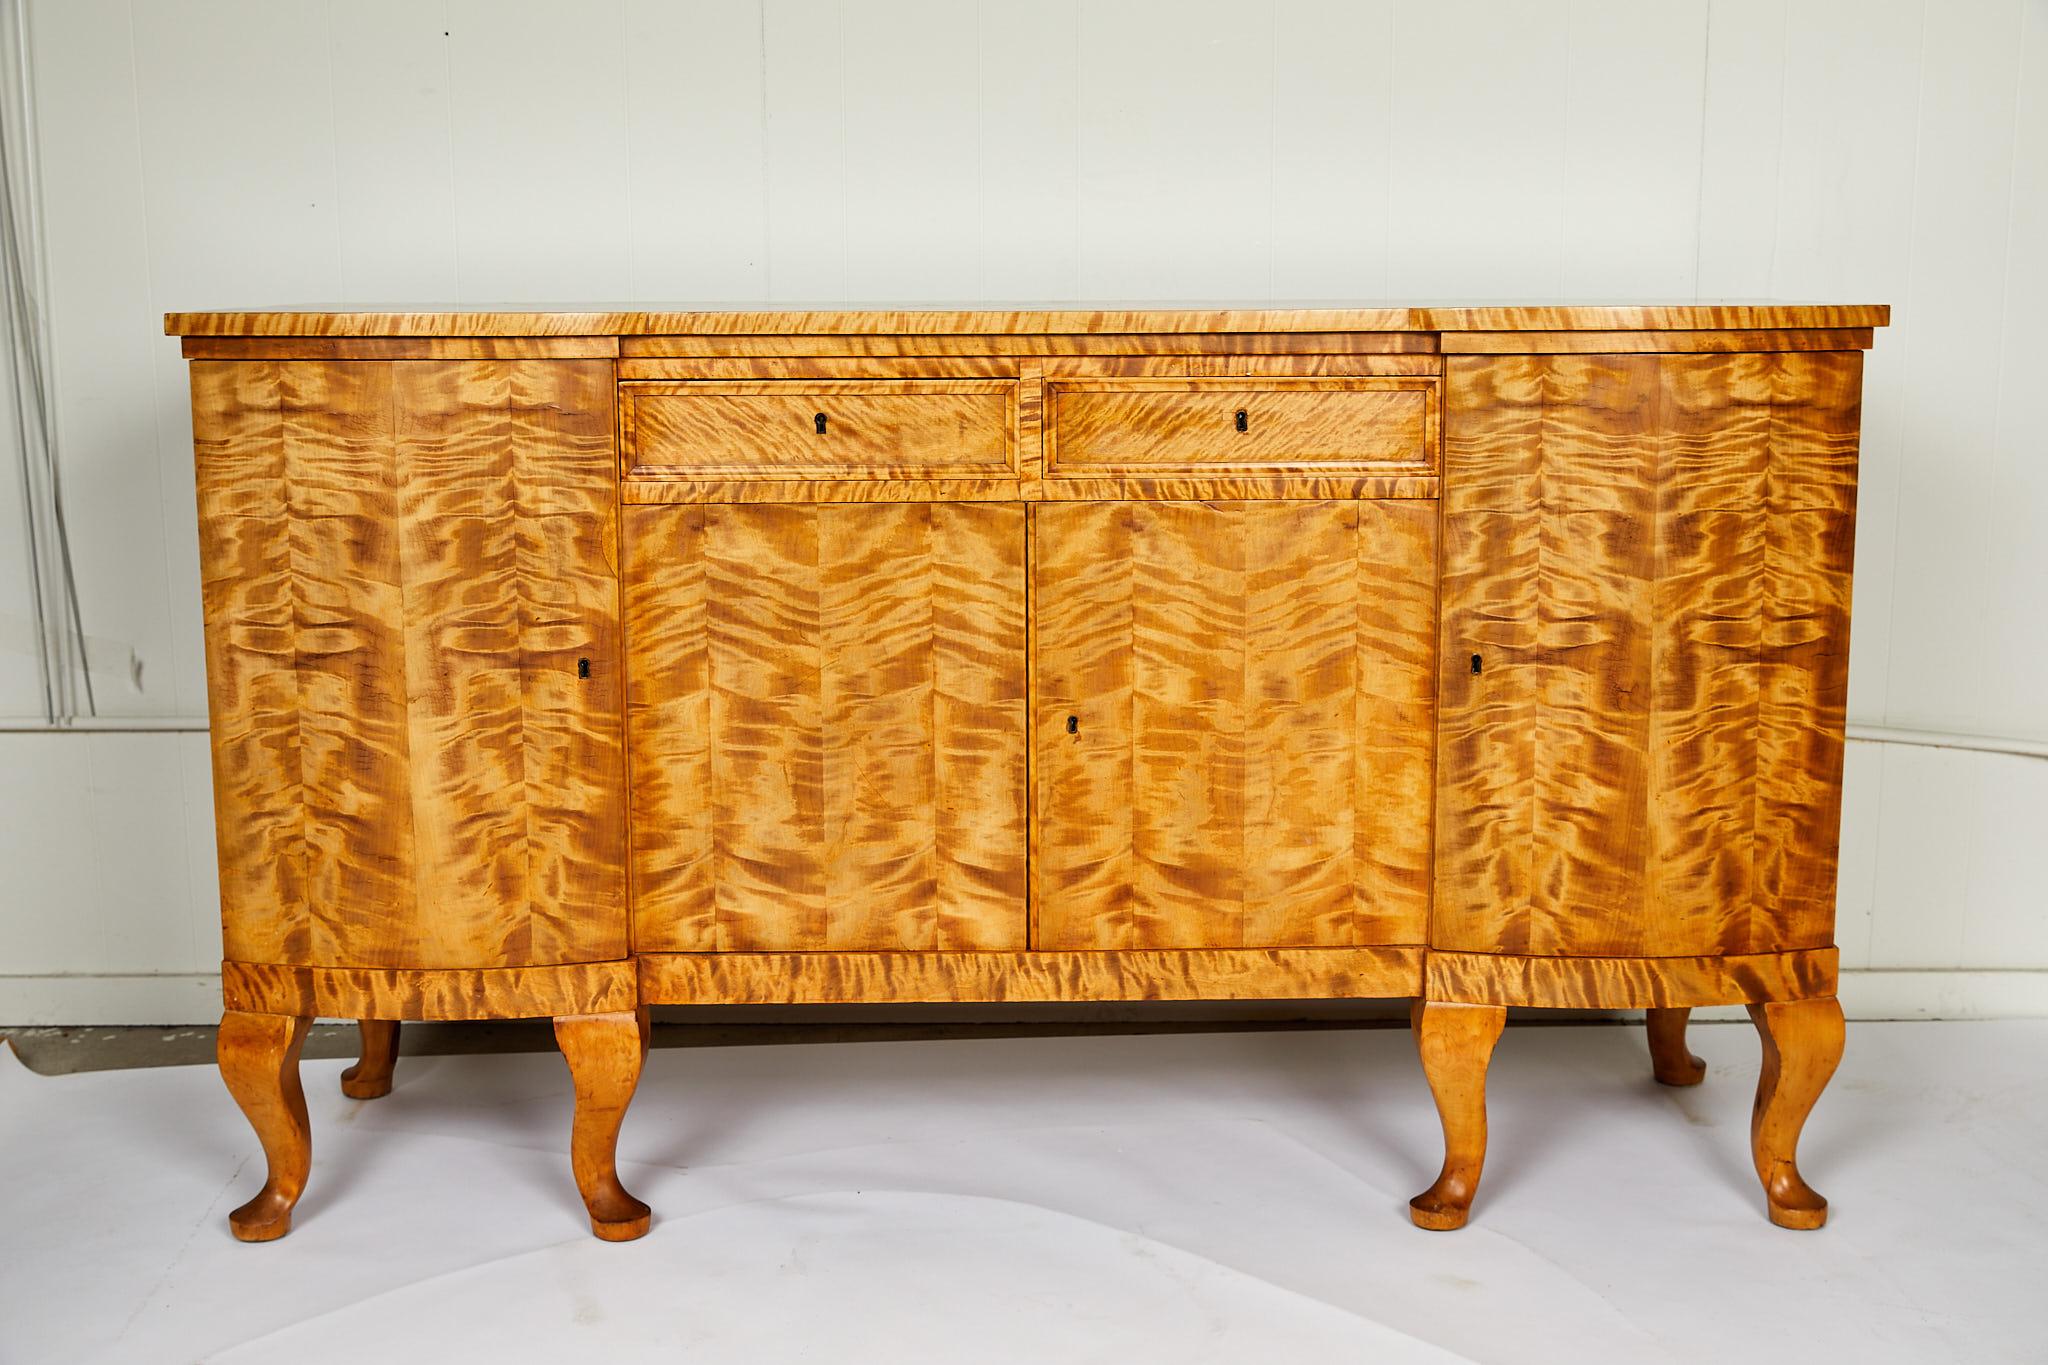 Early 20th century Swedish Art Deco period sideboard/cabinet rendered in highly figured, bookmatched golden flame birch. A shaped one board top is supported by a case holding two drawers and one center cabinet flanked by two outer cabinets. The case